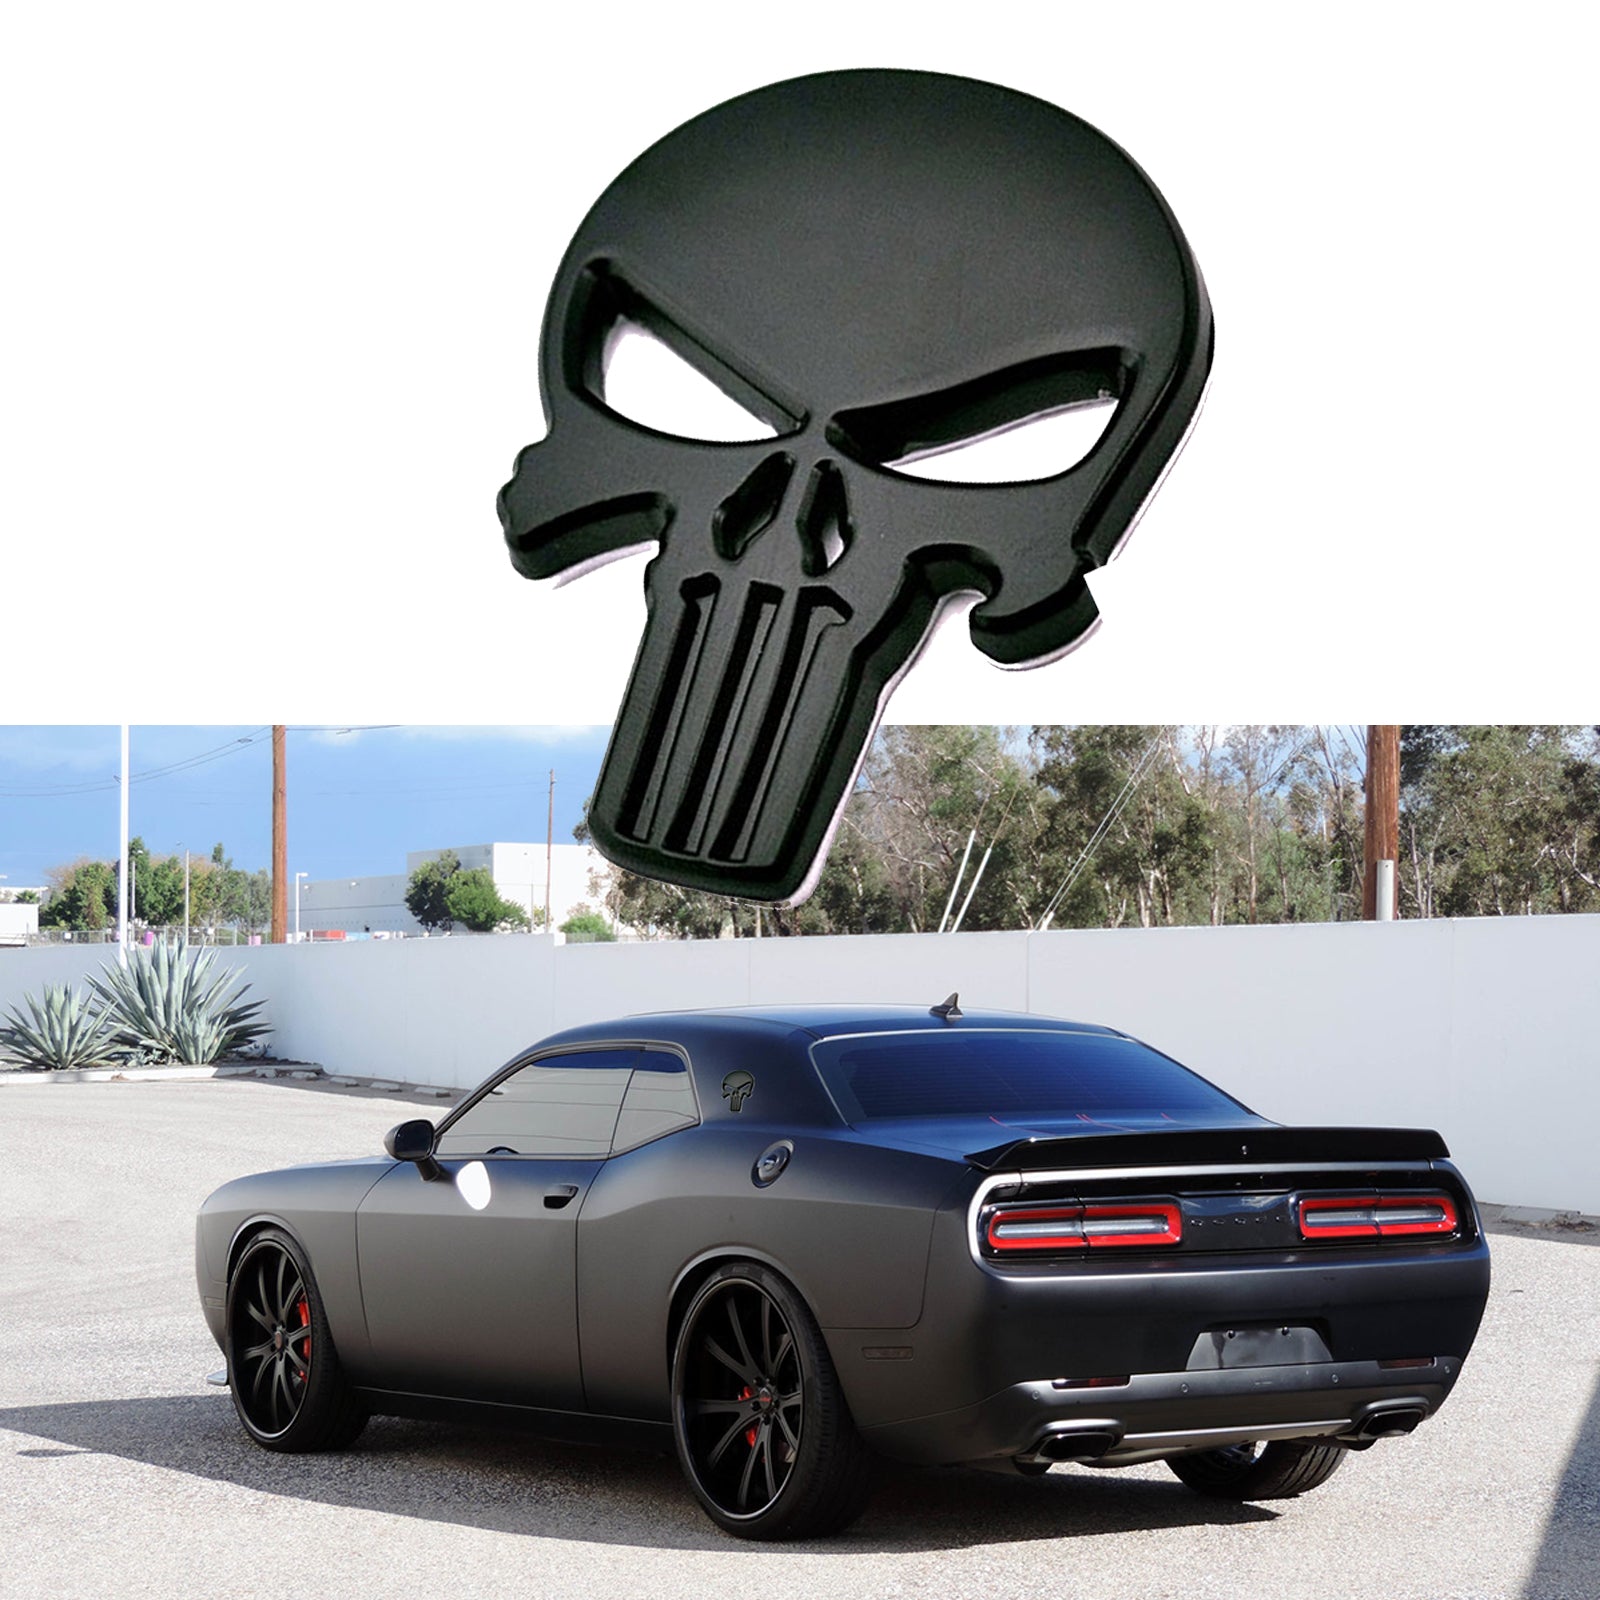 Premium 3D Metal Decal / Sticker Punisher Skull for Car, Truck and